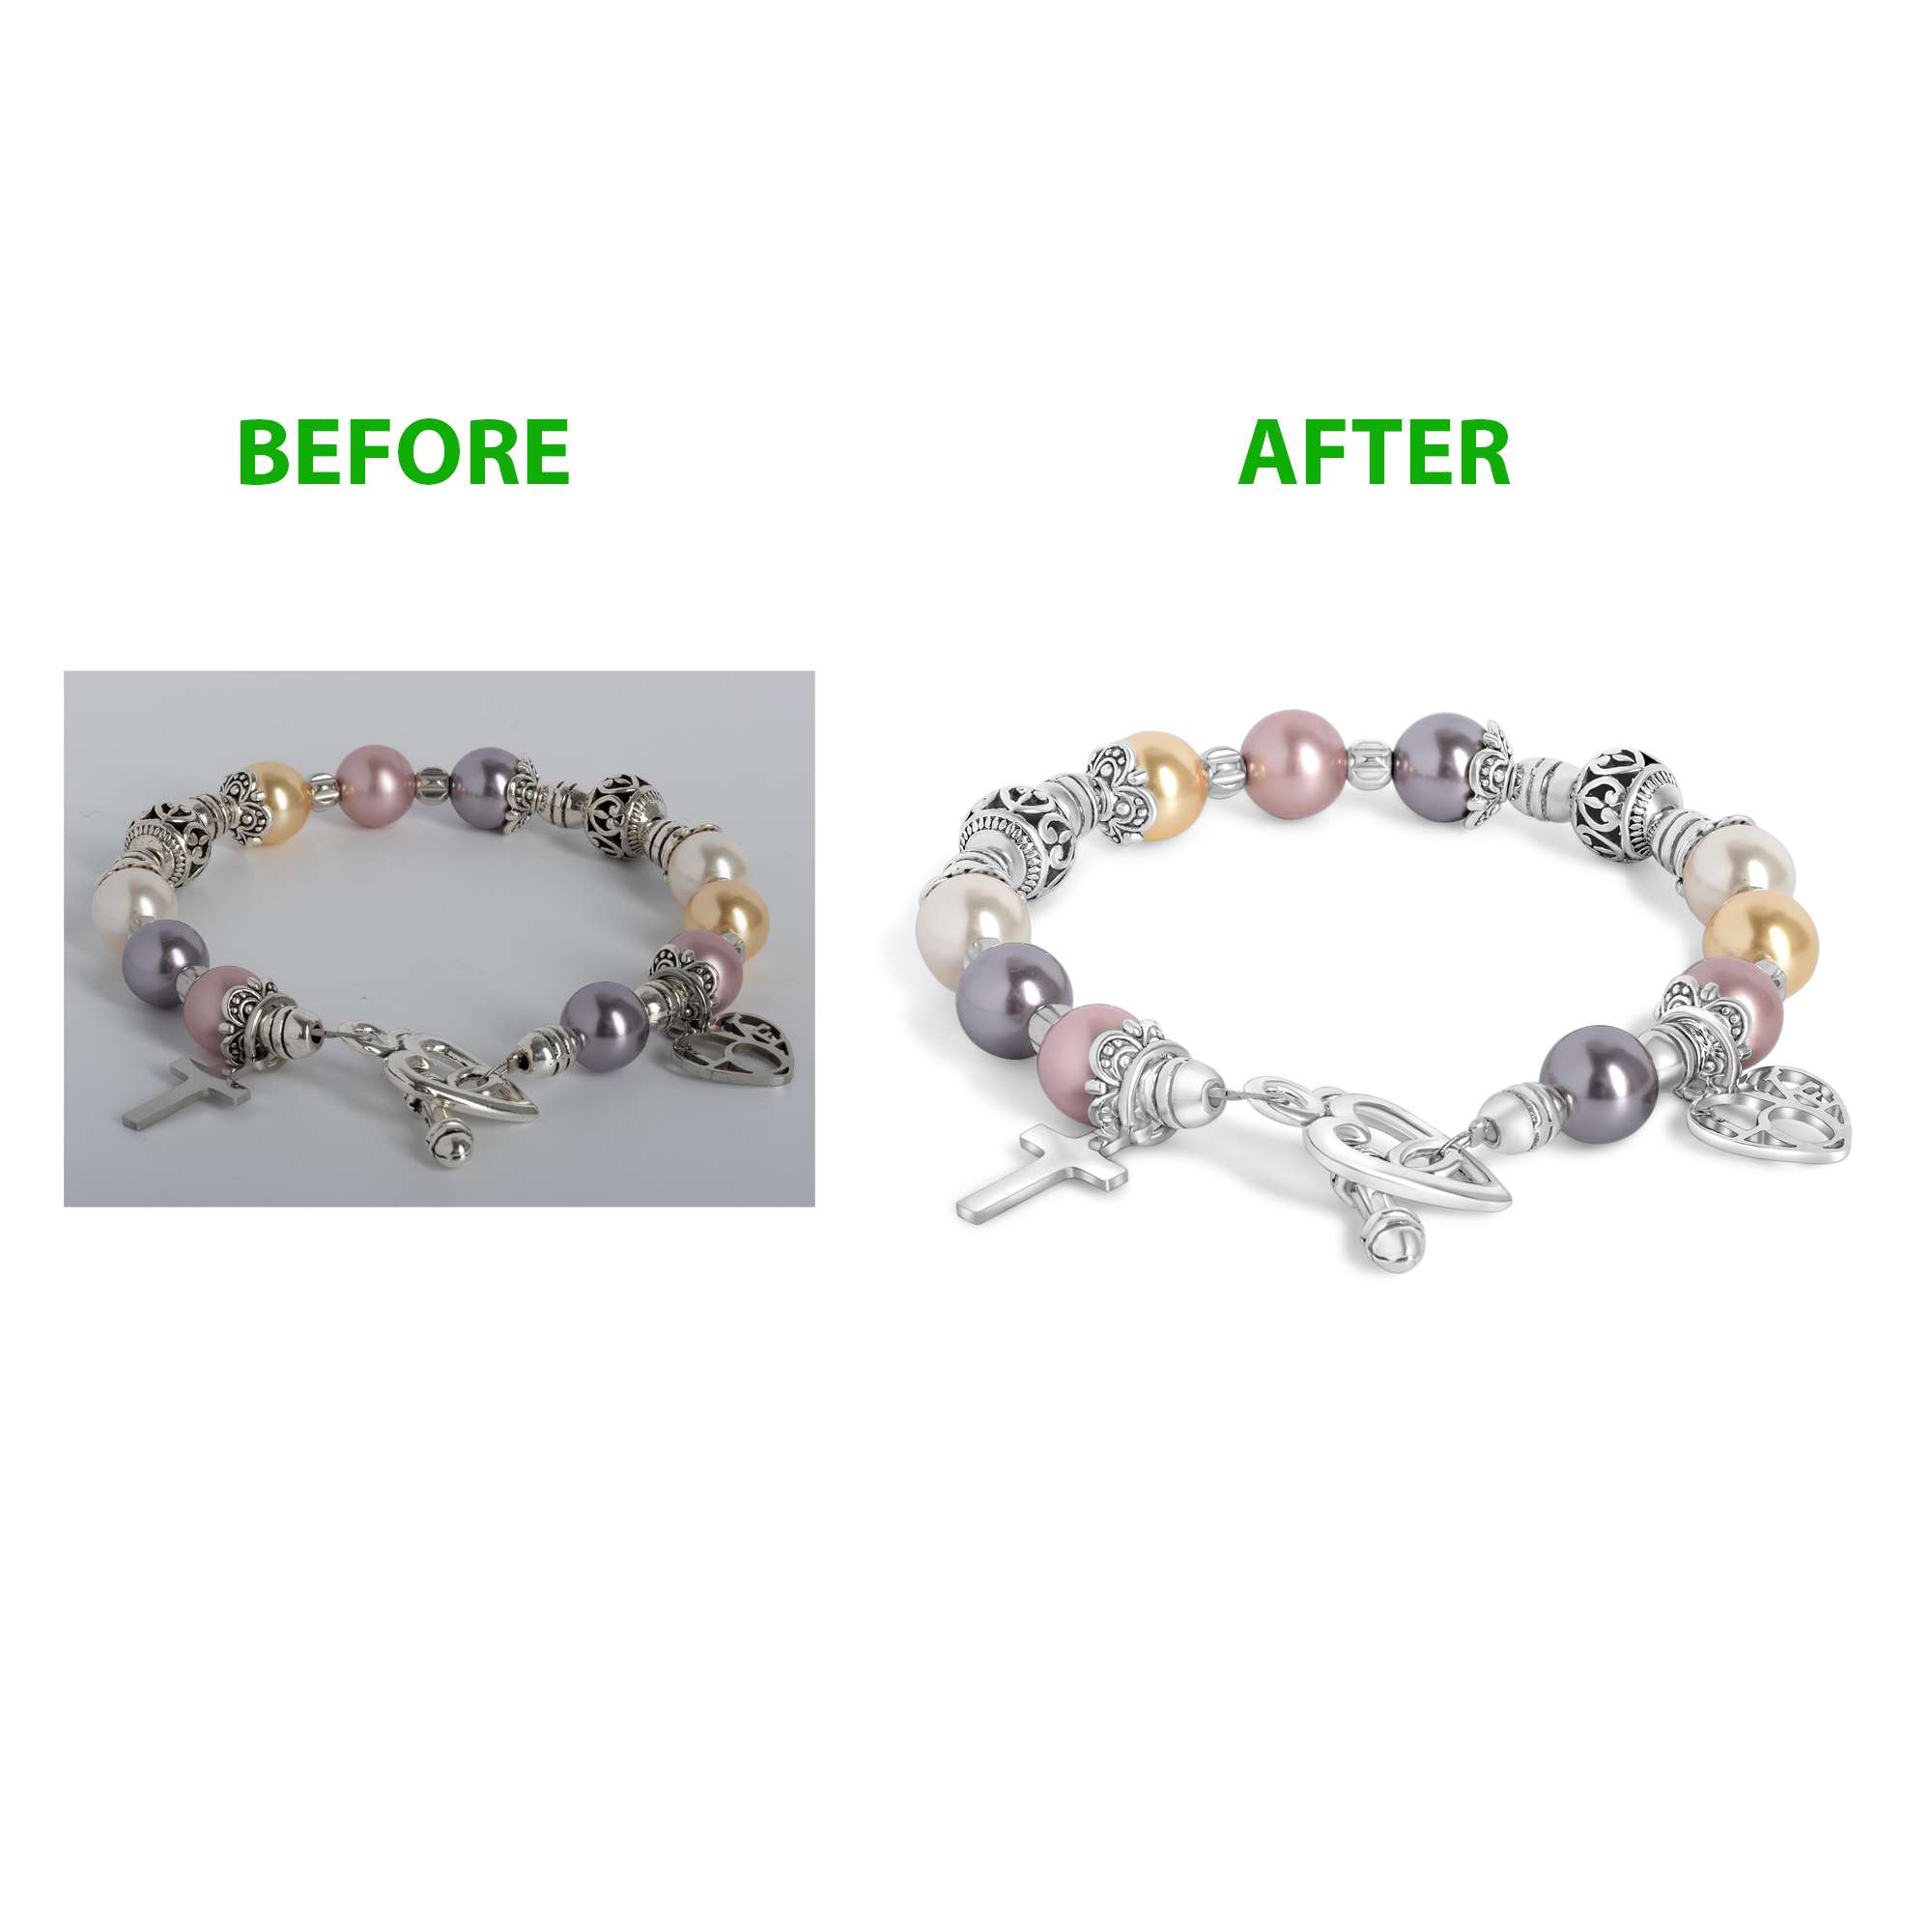 The Role of Photo Retouching in Jewelry Photography